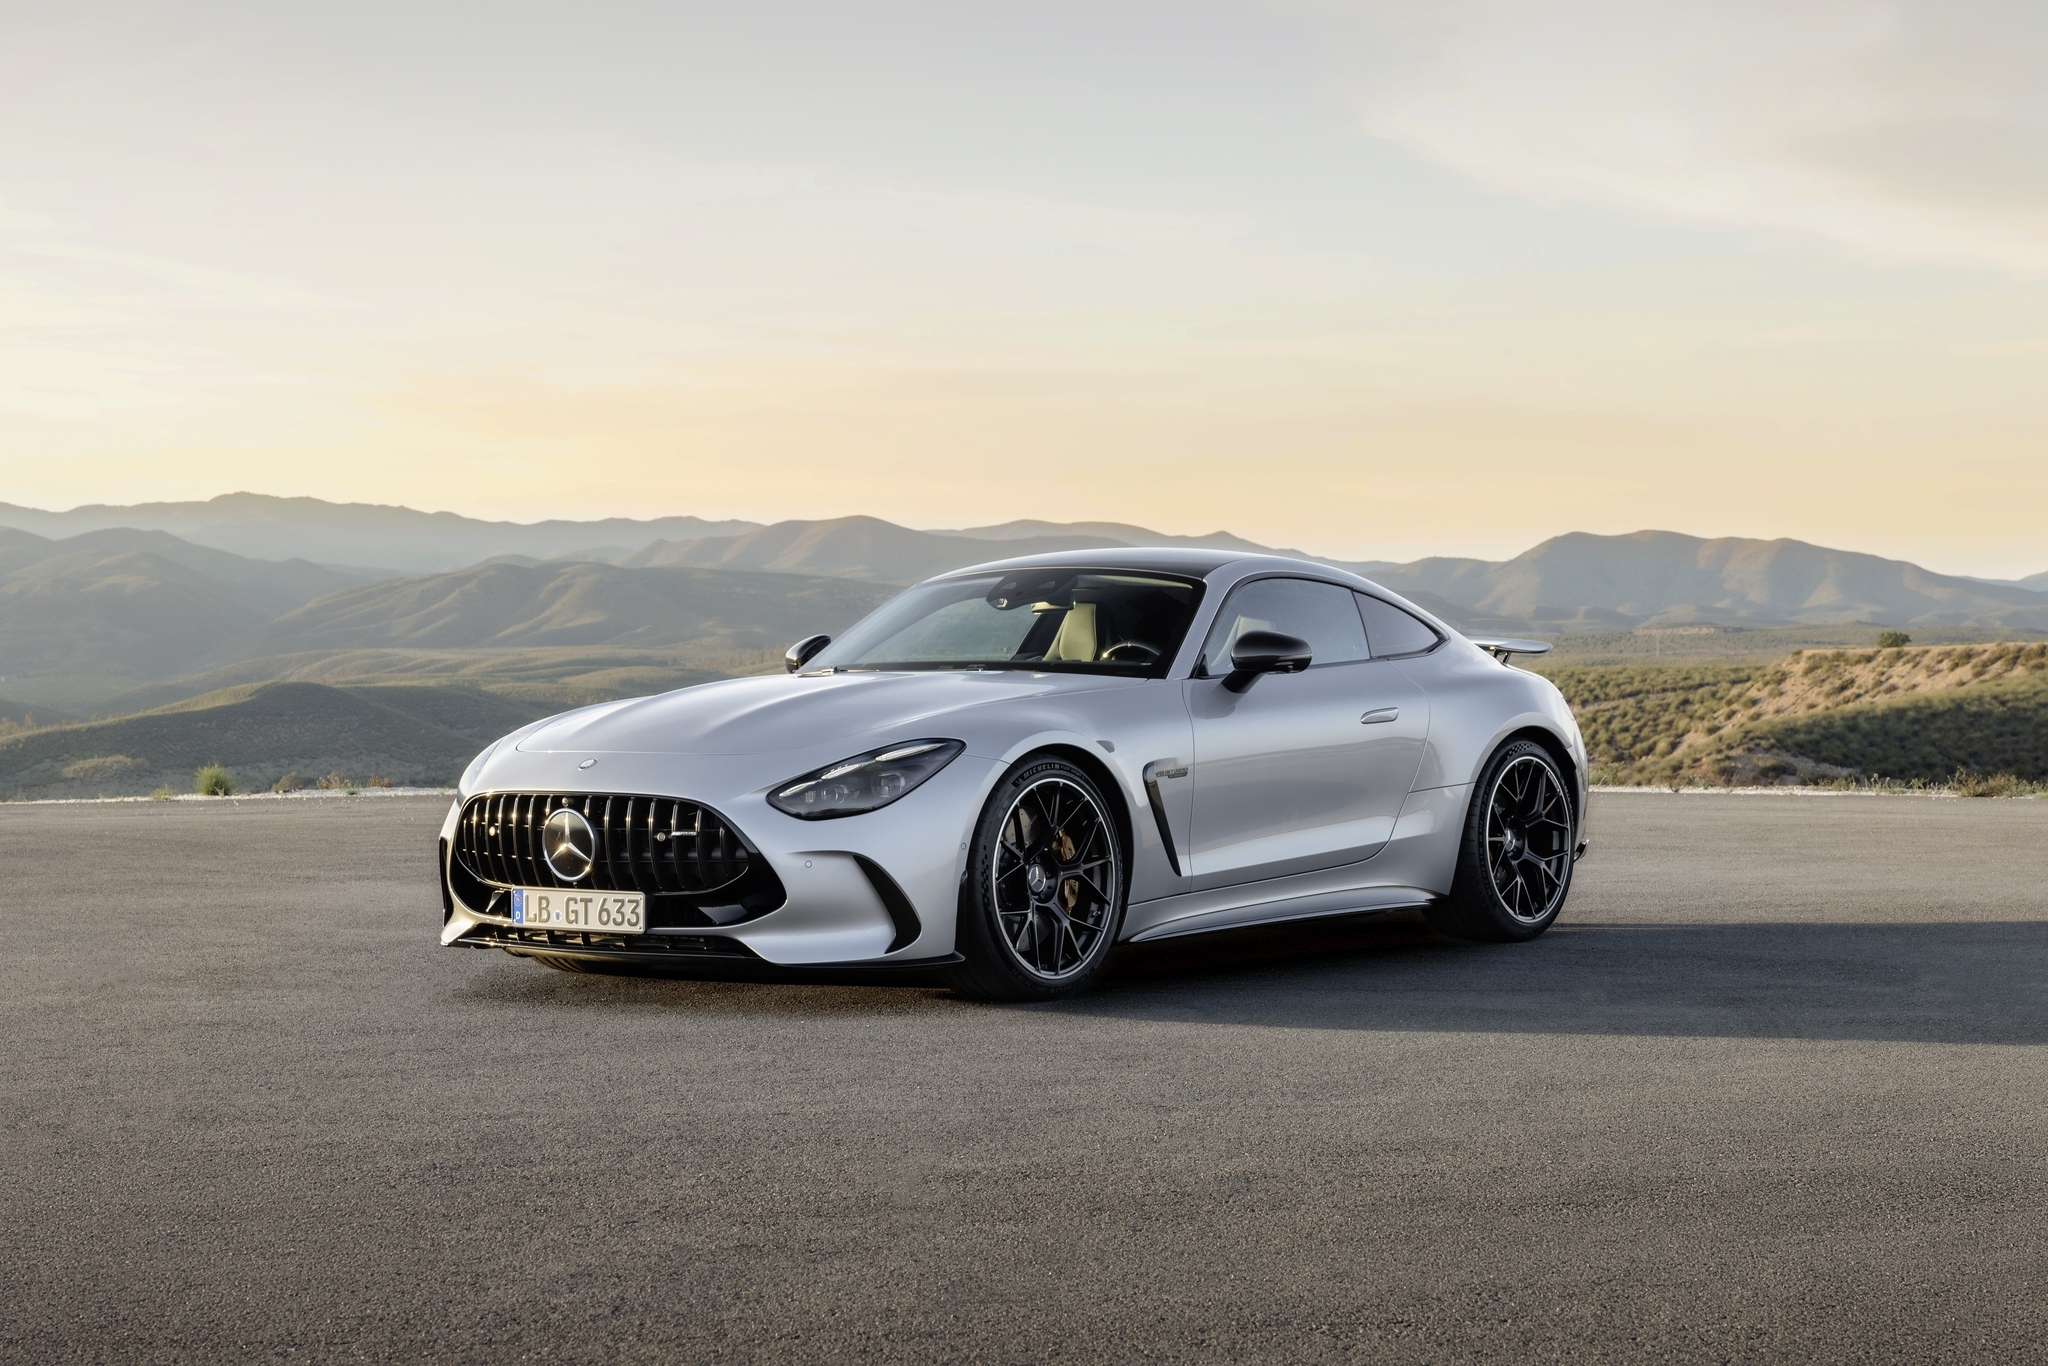 Declassified new four-seat supercar Mercedes-AMG GT